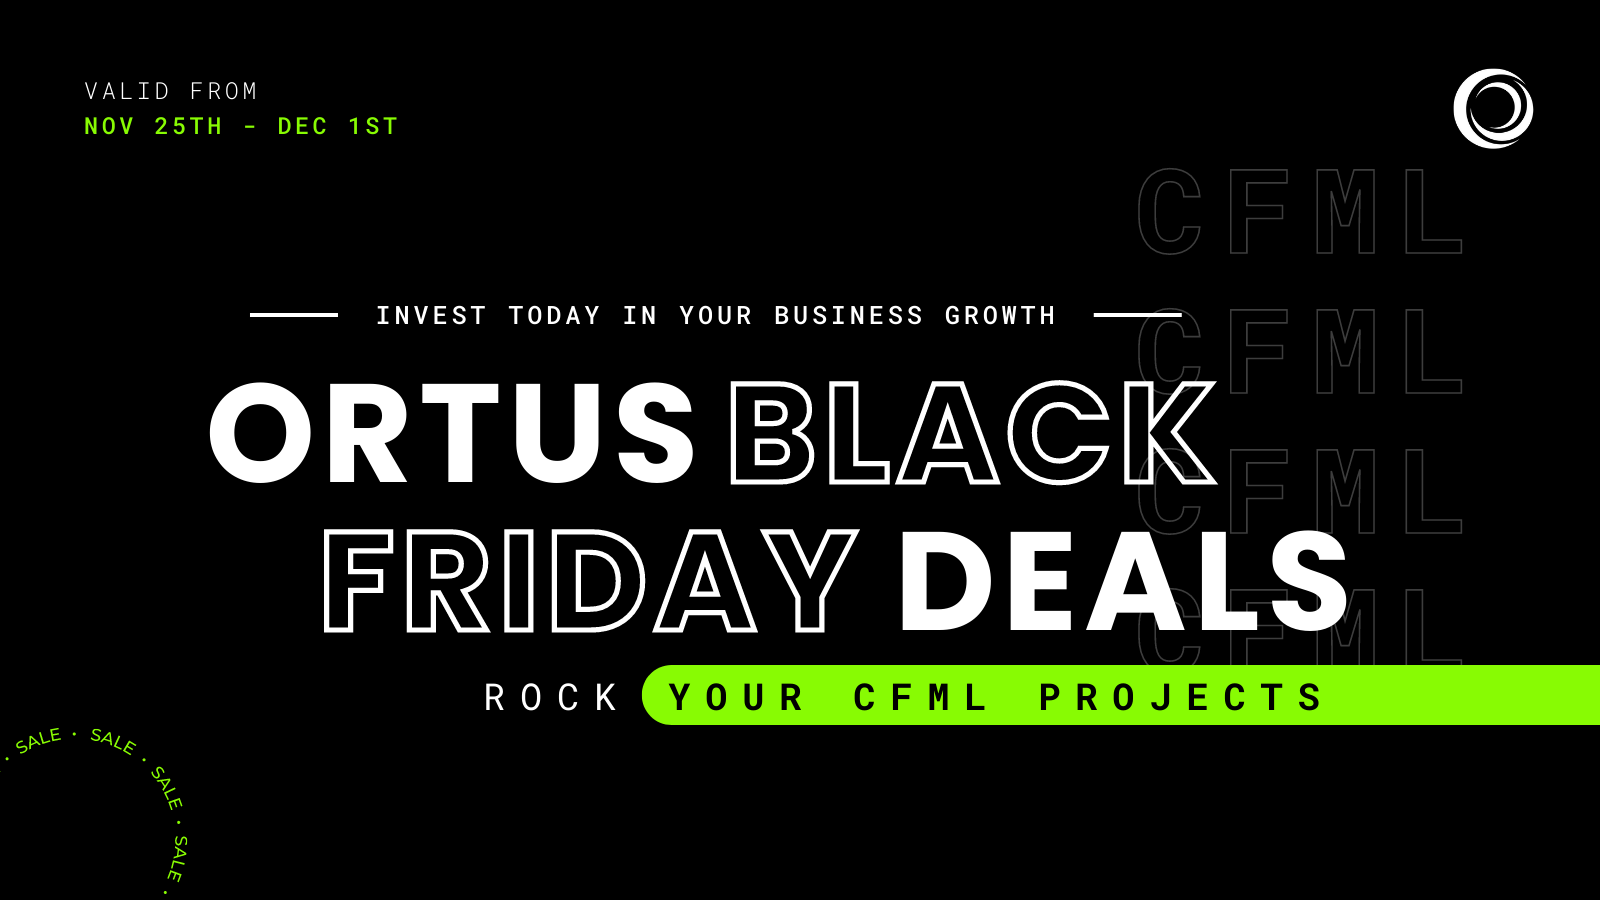 Ortus Black Friday Deals are here!